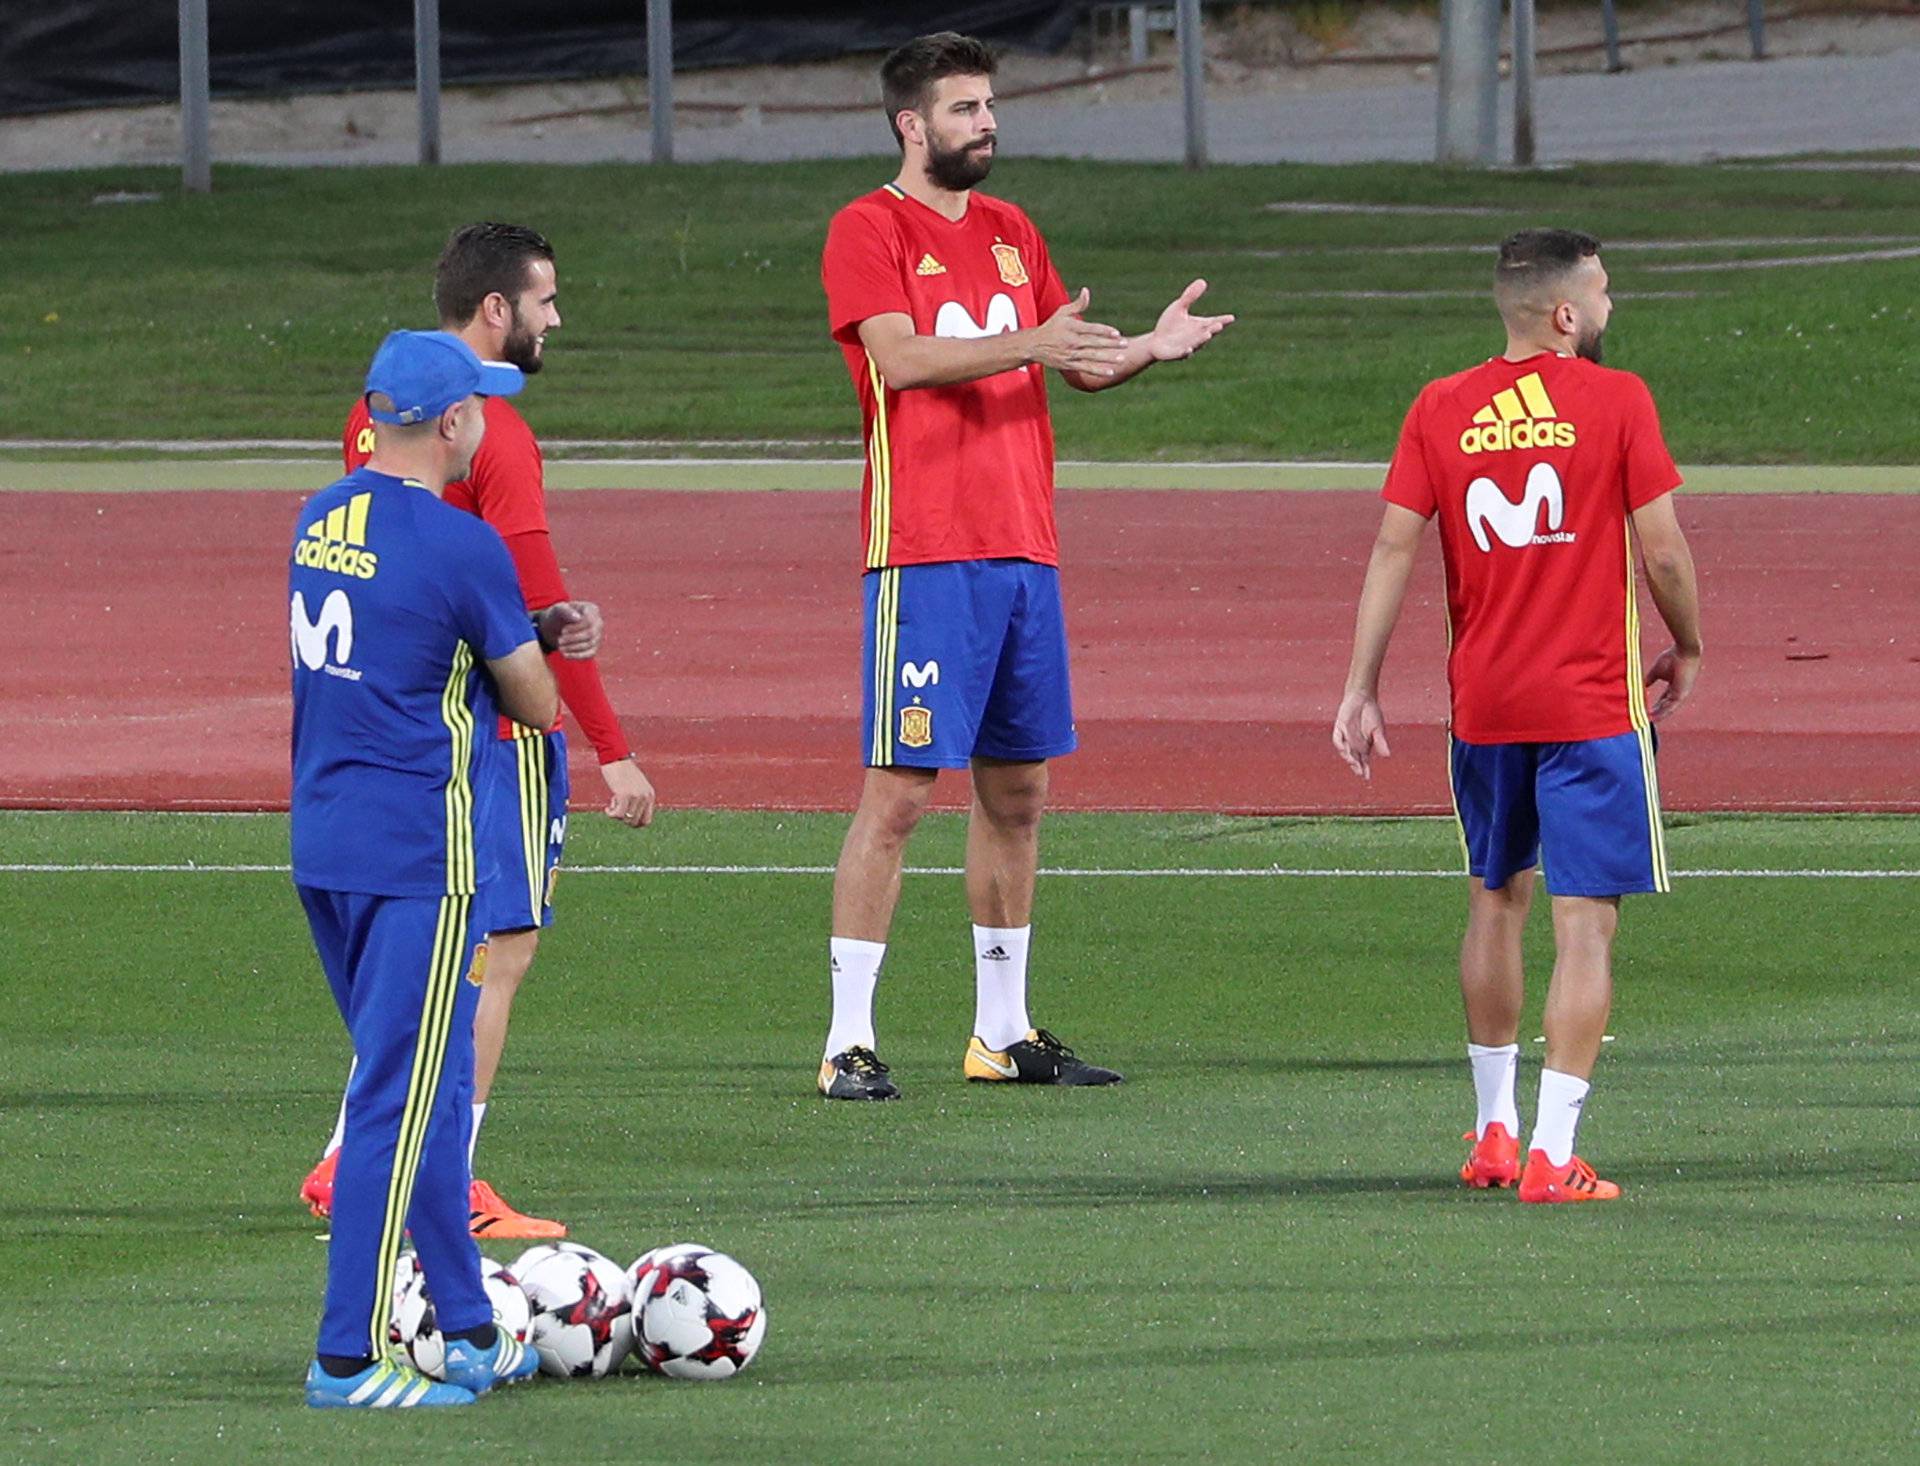 Spain's player Pique gestures during a training session in Las Rozas